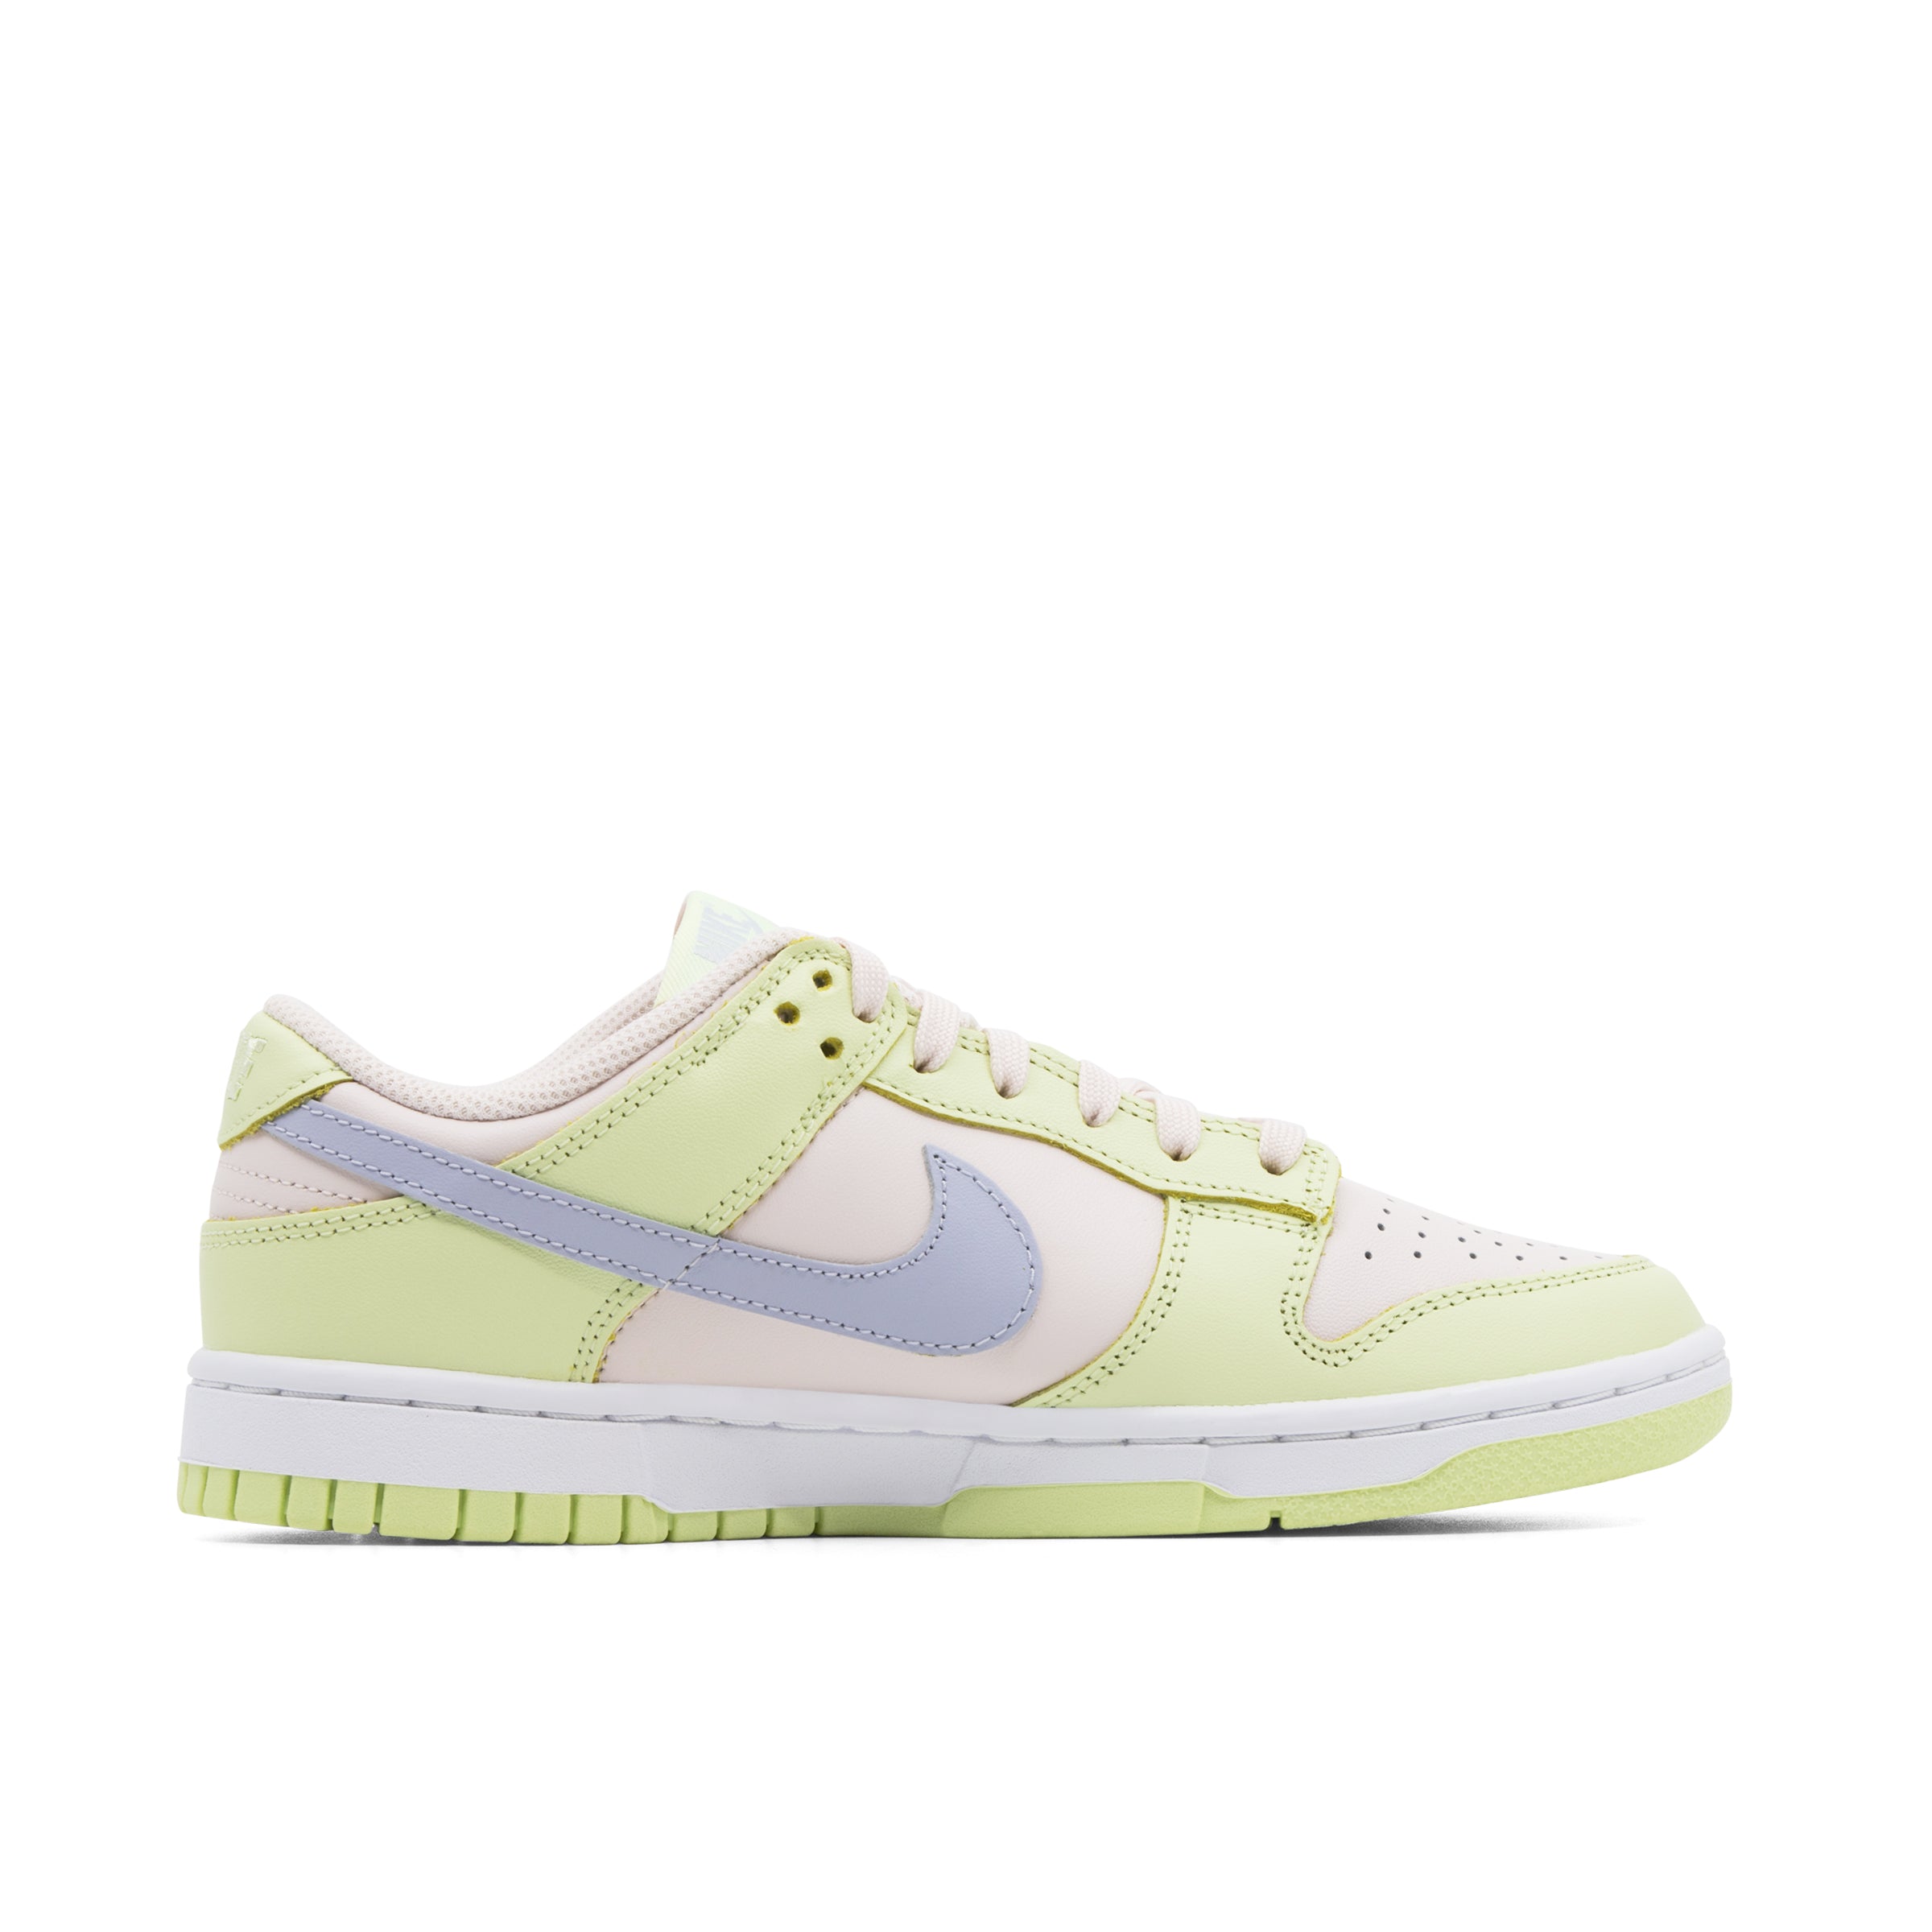 NIKE DUNK LOW WMNS LIMA ICE